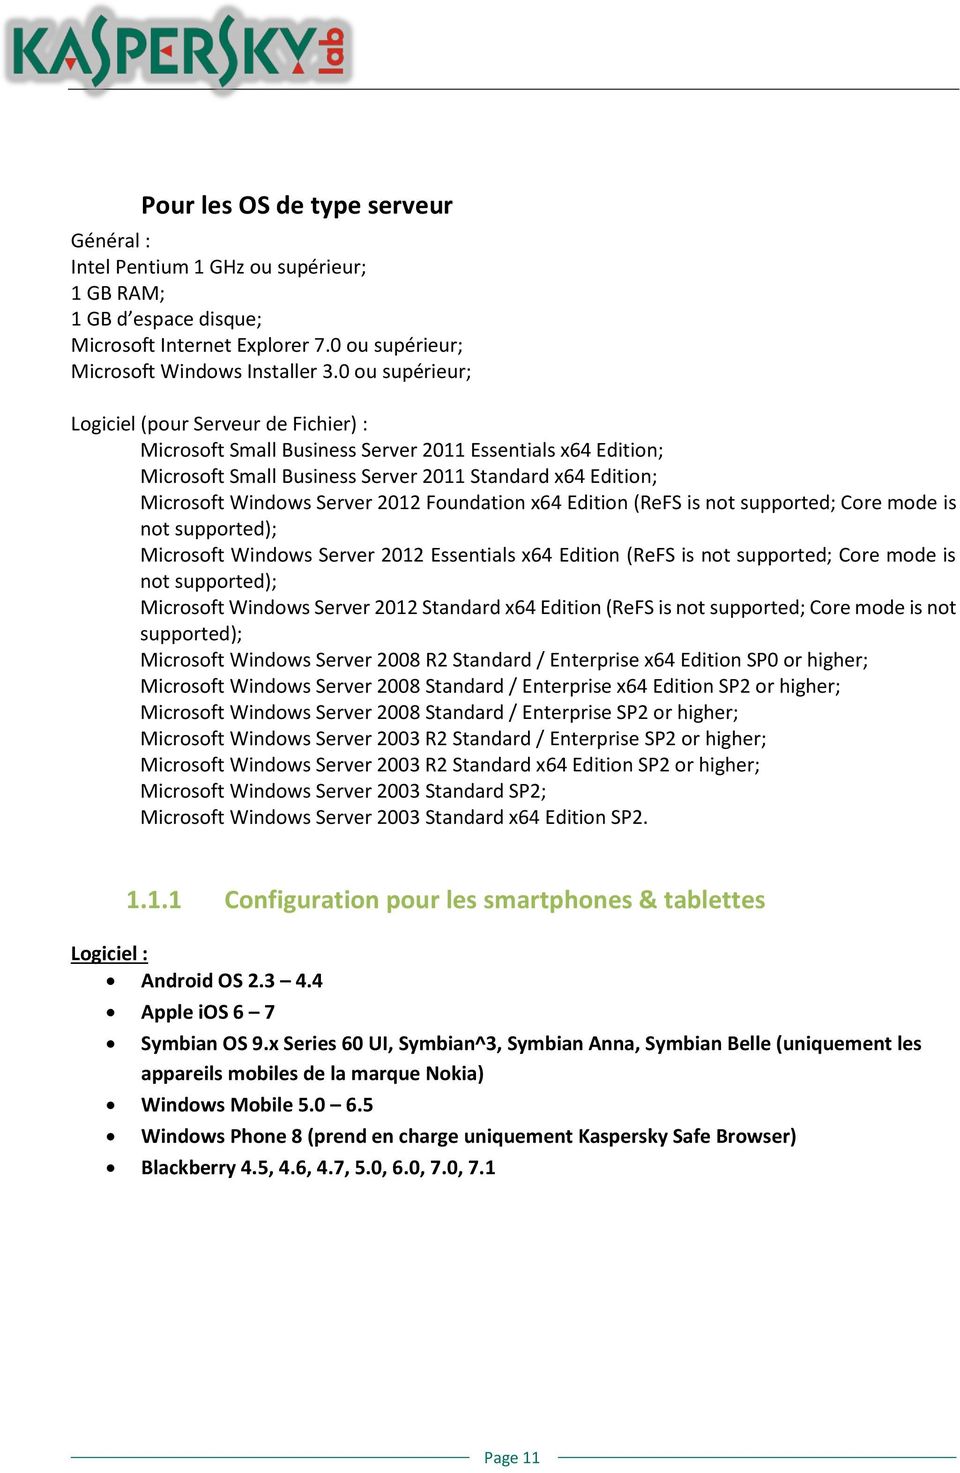 2012 Foundation х64 Edition (ReFS is not supported; Core mode is not supported); Microsoft Windows Server 2012 Essentials х64 Edition (ReFS is not supported; Core mode is not supported); Microsoft